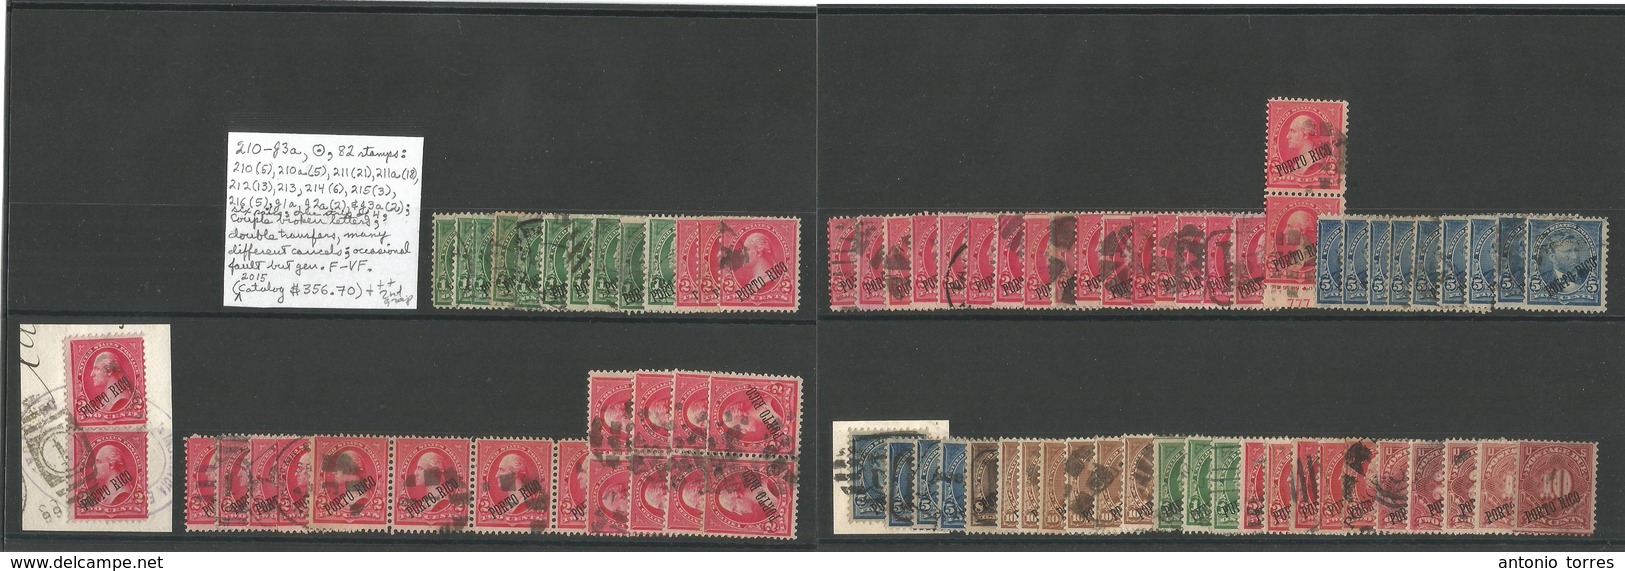 PUERTO RICO. 1898-9. US Period. Ovptd Issue PORTO RICO. High Catalogue Value In Two Stock Cards With Variety Of Cancels, - Puerto Rico